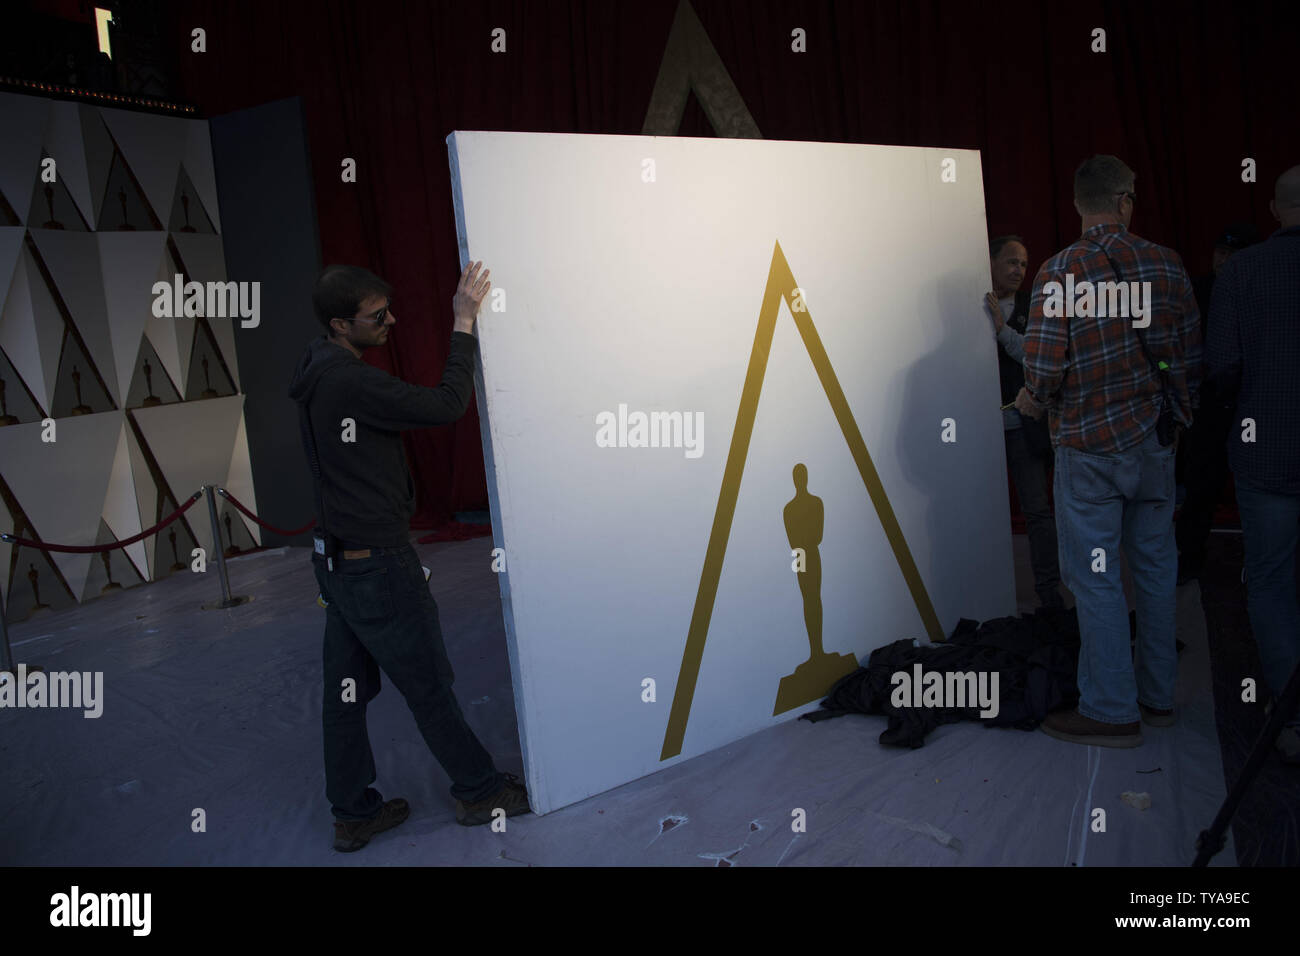 Workers move Oscar signage as preparations are underway for the 89th annual Academy Awards in the Hollywood section of Los Angeles on February 23, 2017. The 2017 Academy Awards will take place this Sunday. Photo by Kevin Dietsch/UPI Stock Photo